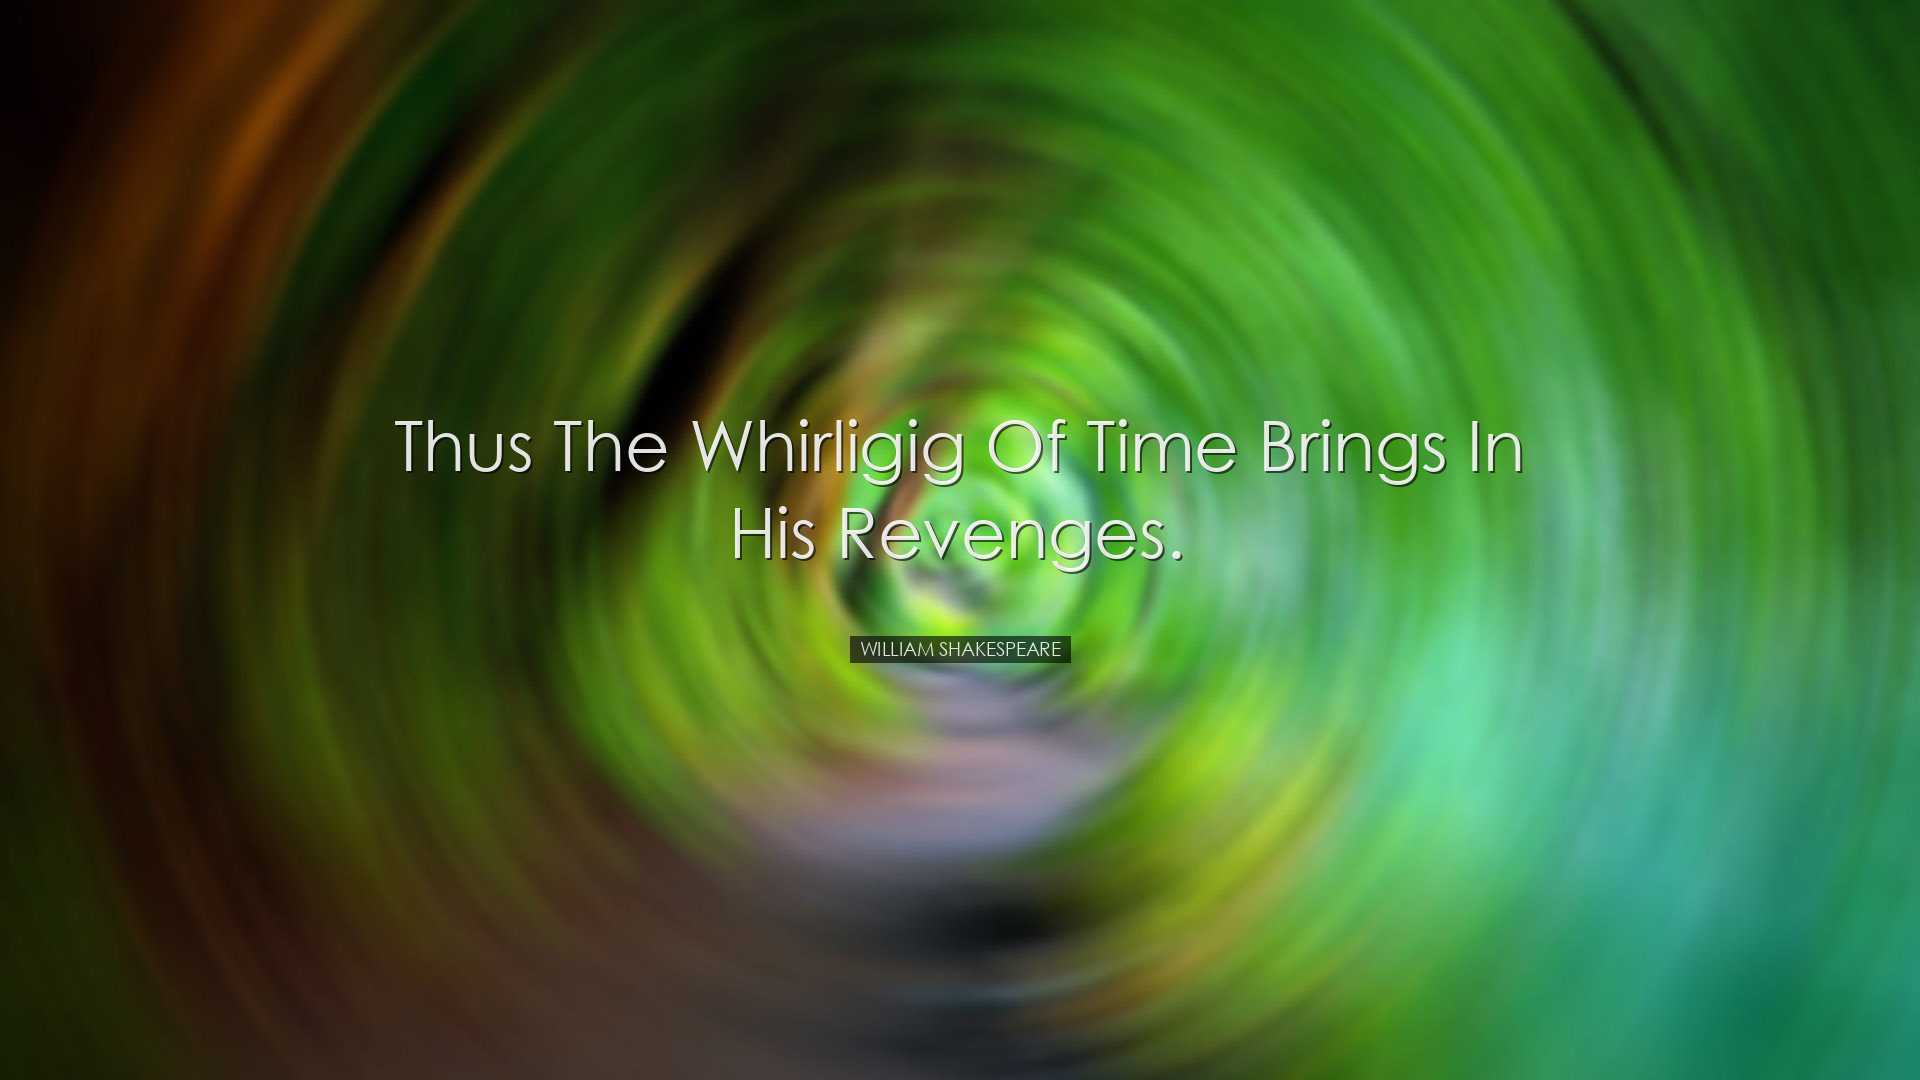 Thus the whirligig of time brings in his revenges. - William Shake